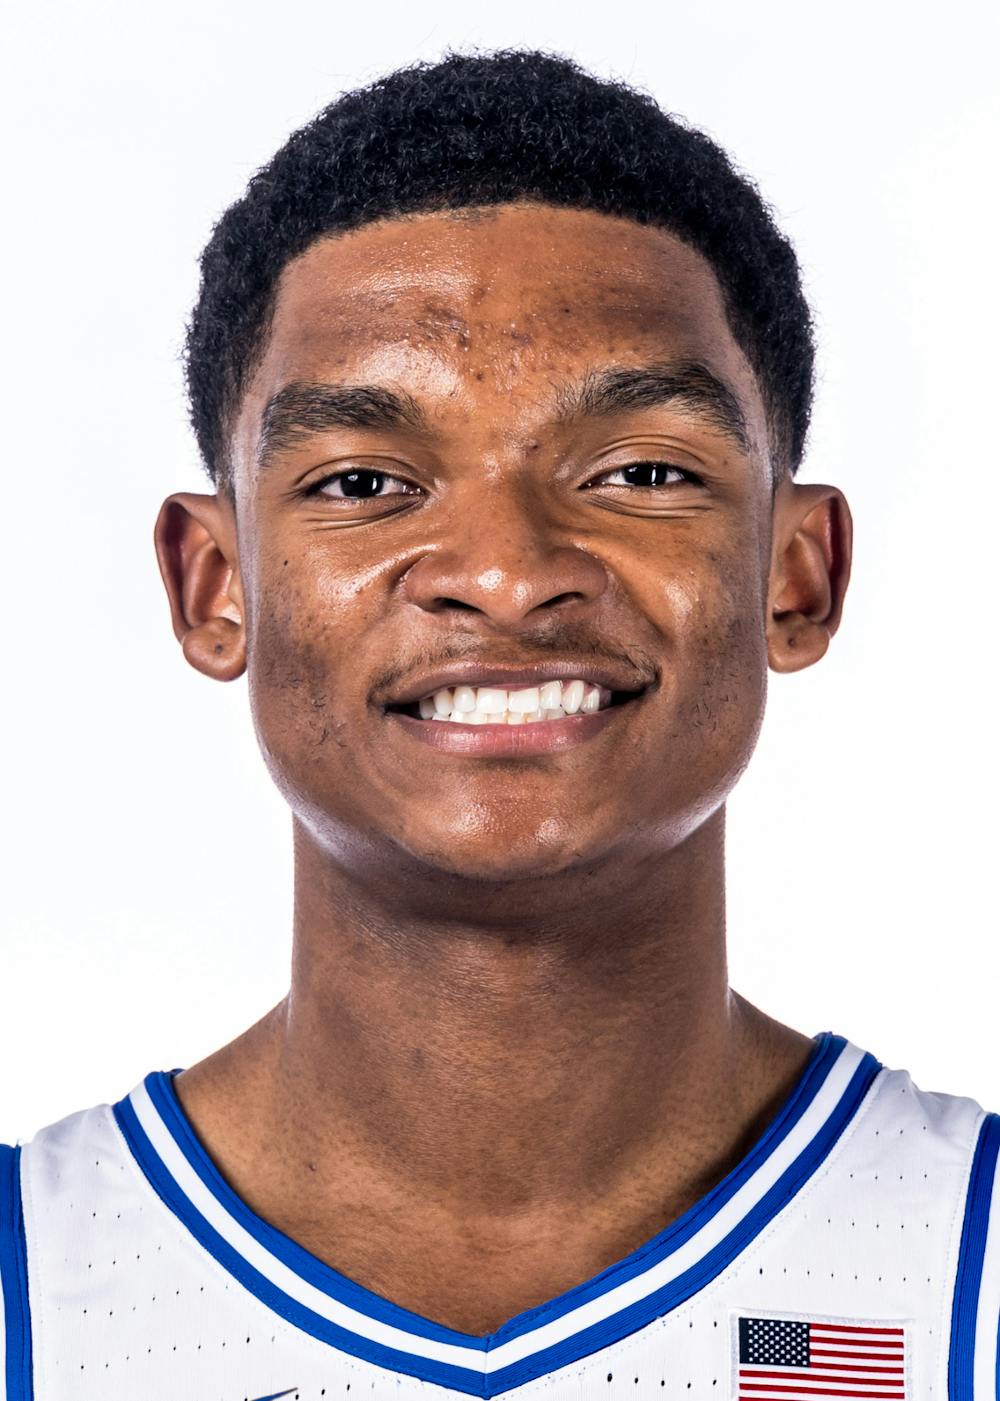 Caleb Foster is one of two freshman guards on the Duke roster alongside classmate Jared McCain.